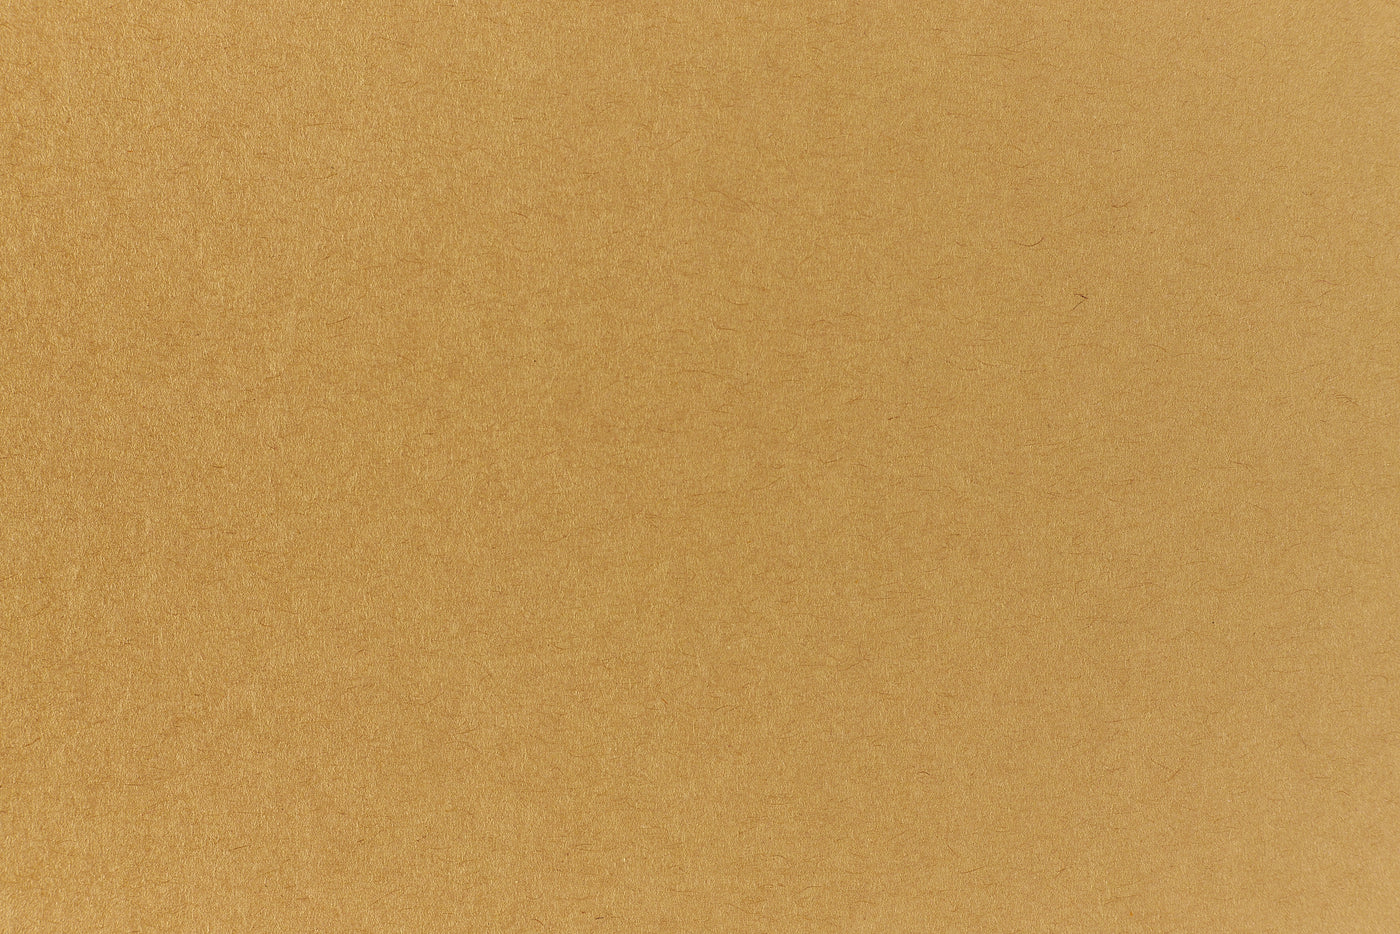 Packing Brown Wrap Paper (Dur-O-Tone, Text Weight)